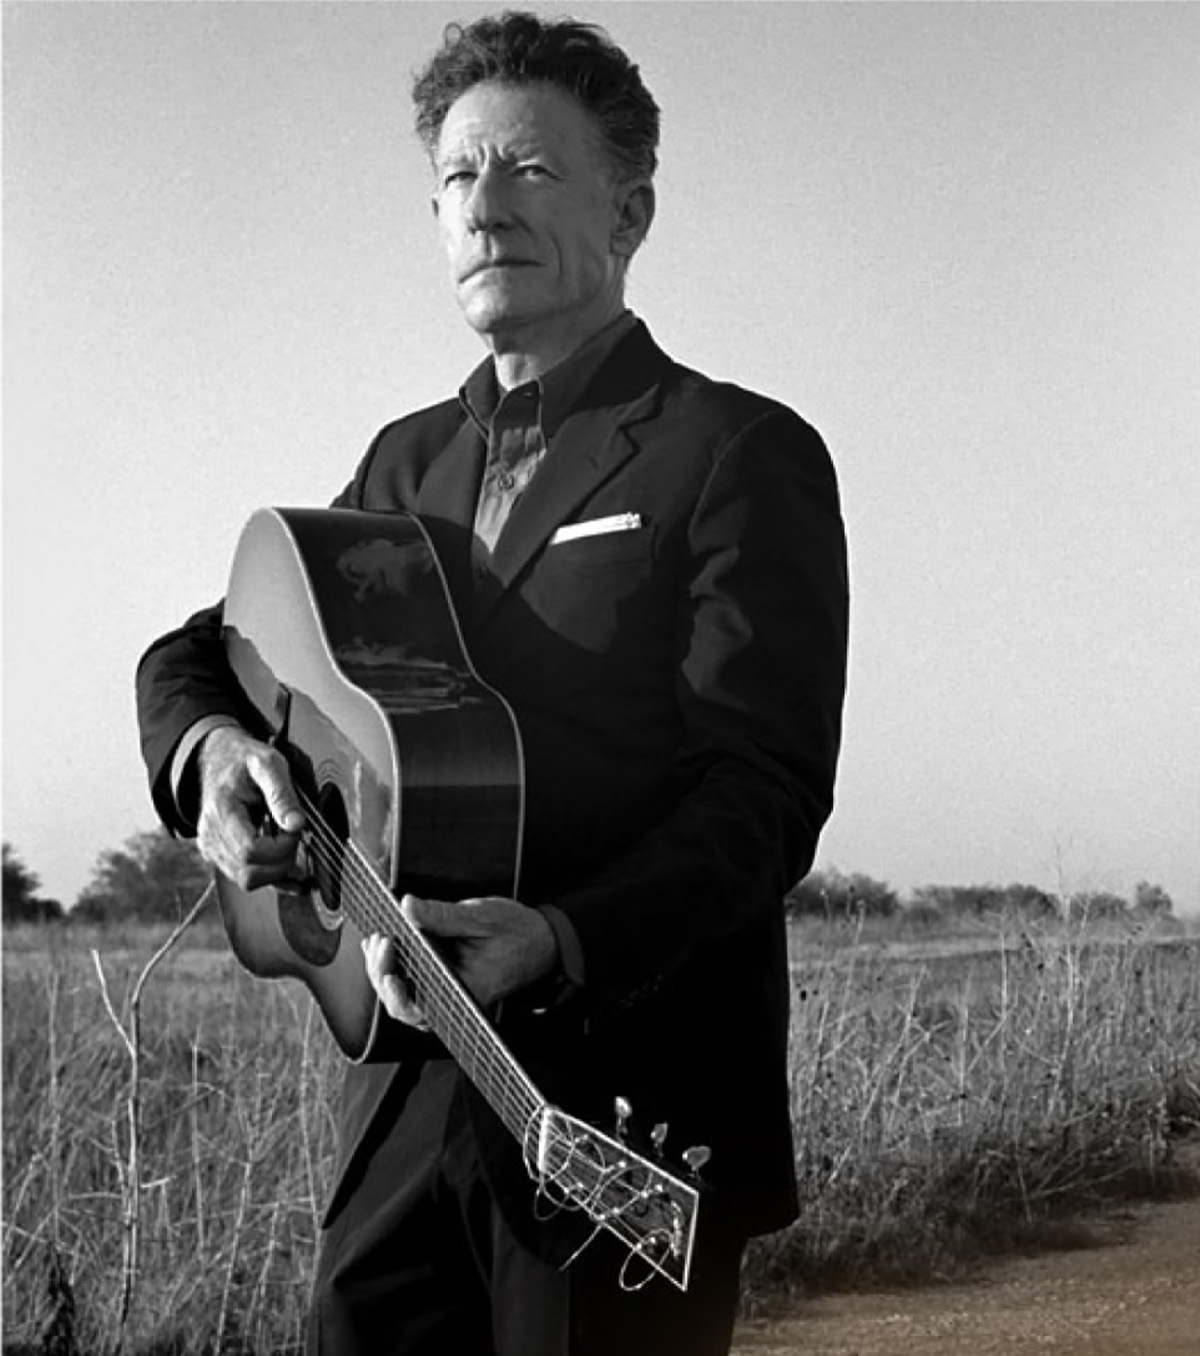 Lyle Lovett and his Acoustic Group 1